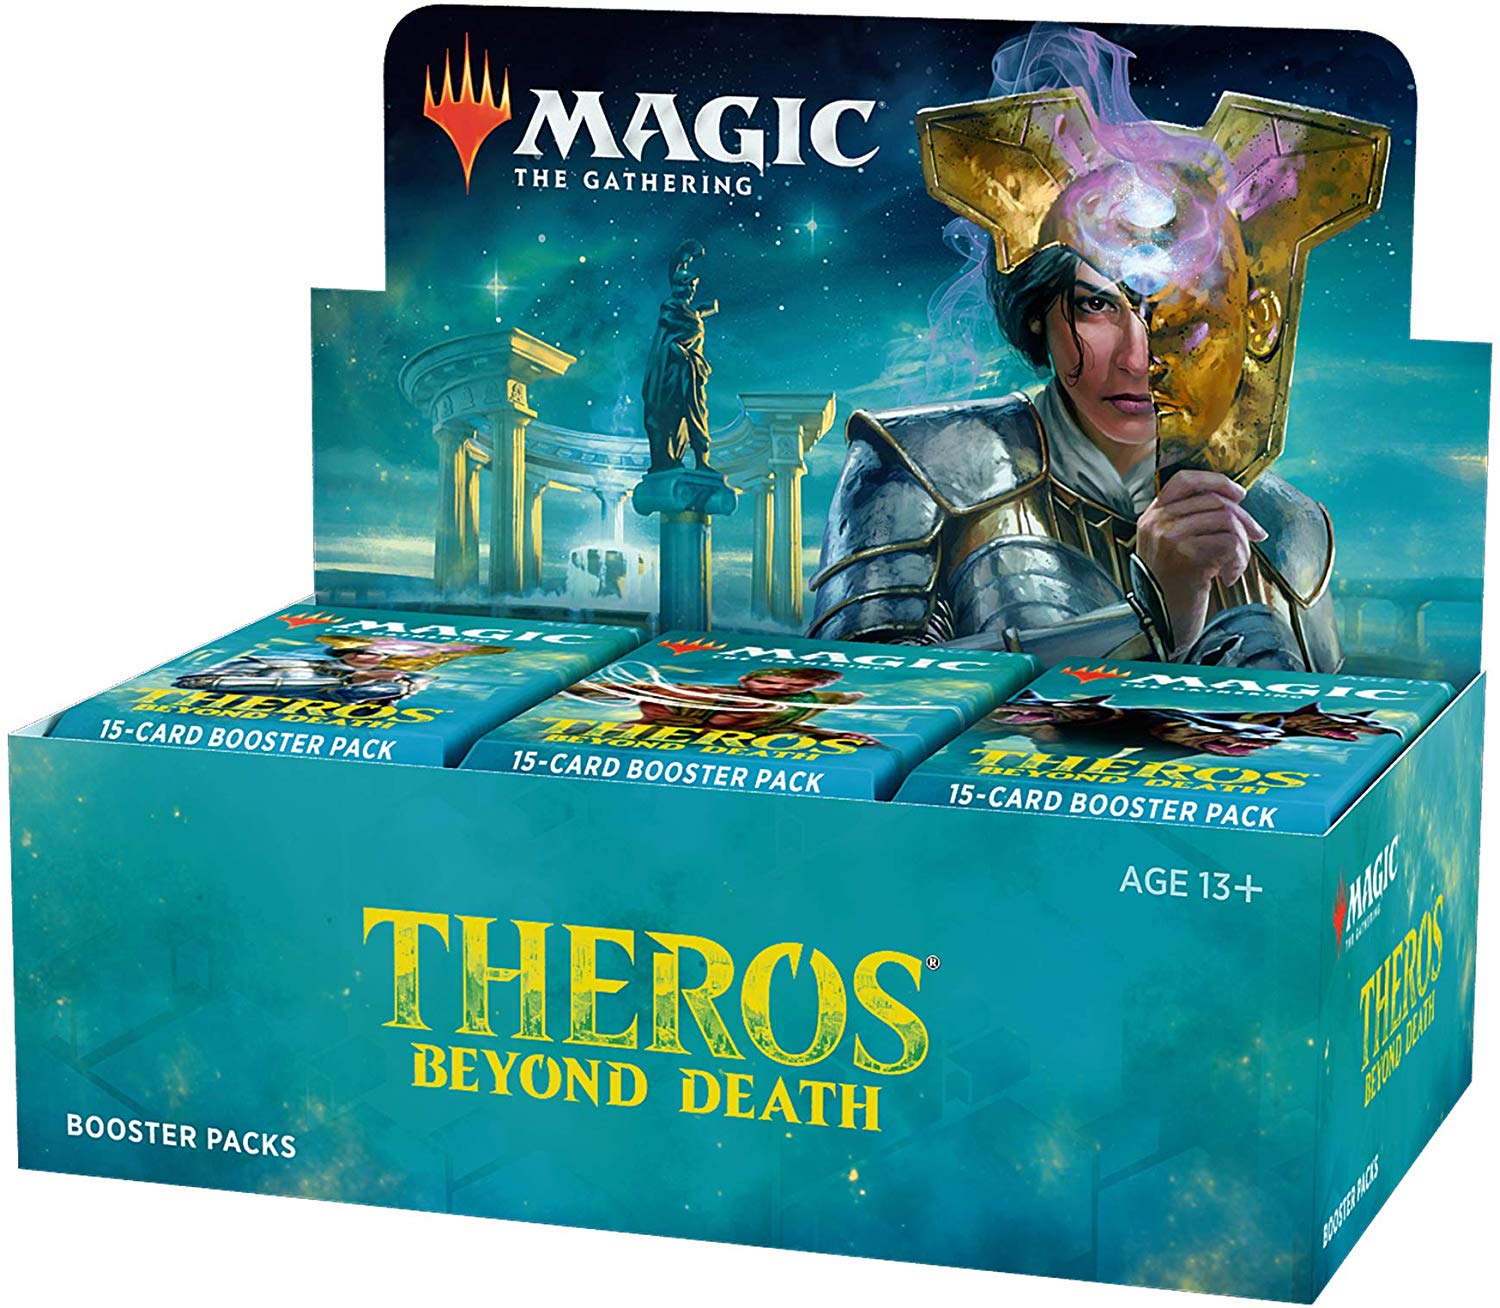 Magic the Gathering TCG Theros Beyond Death Draft Booster Box